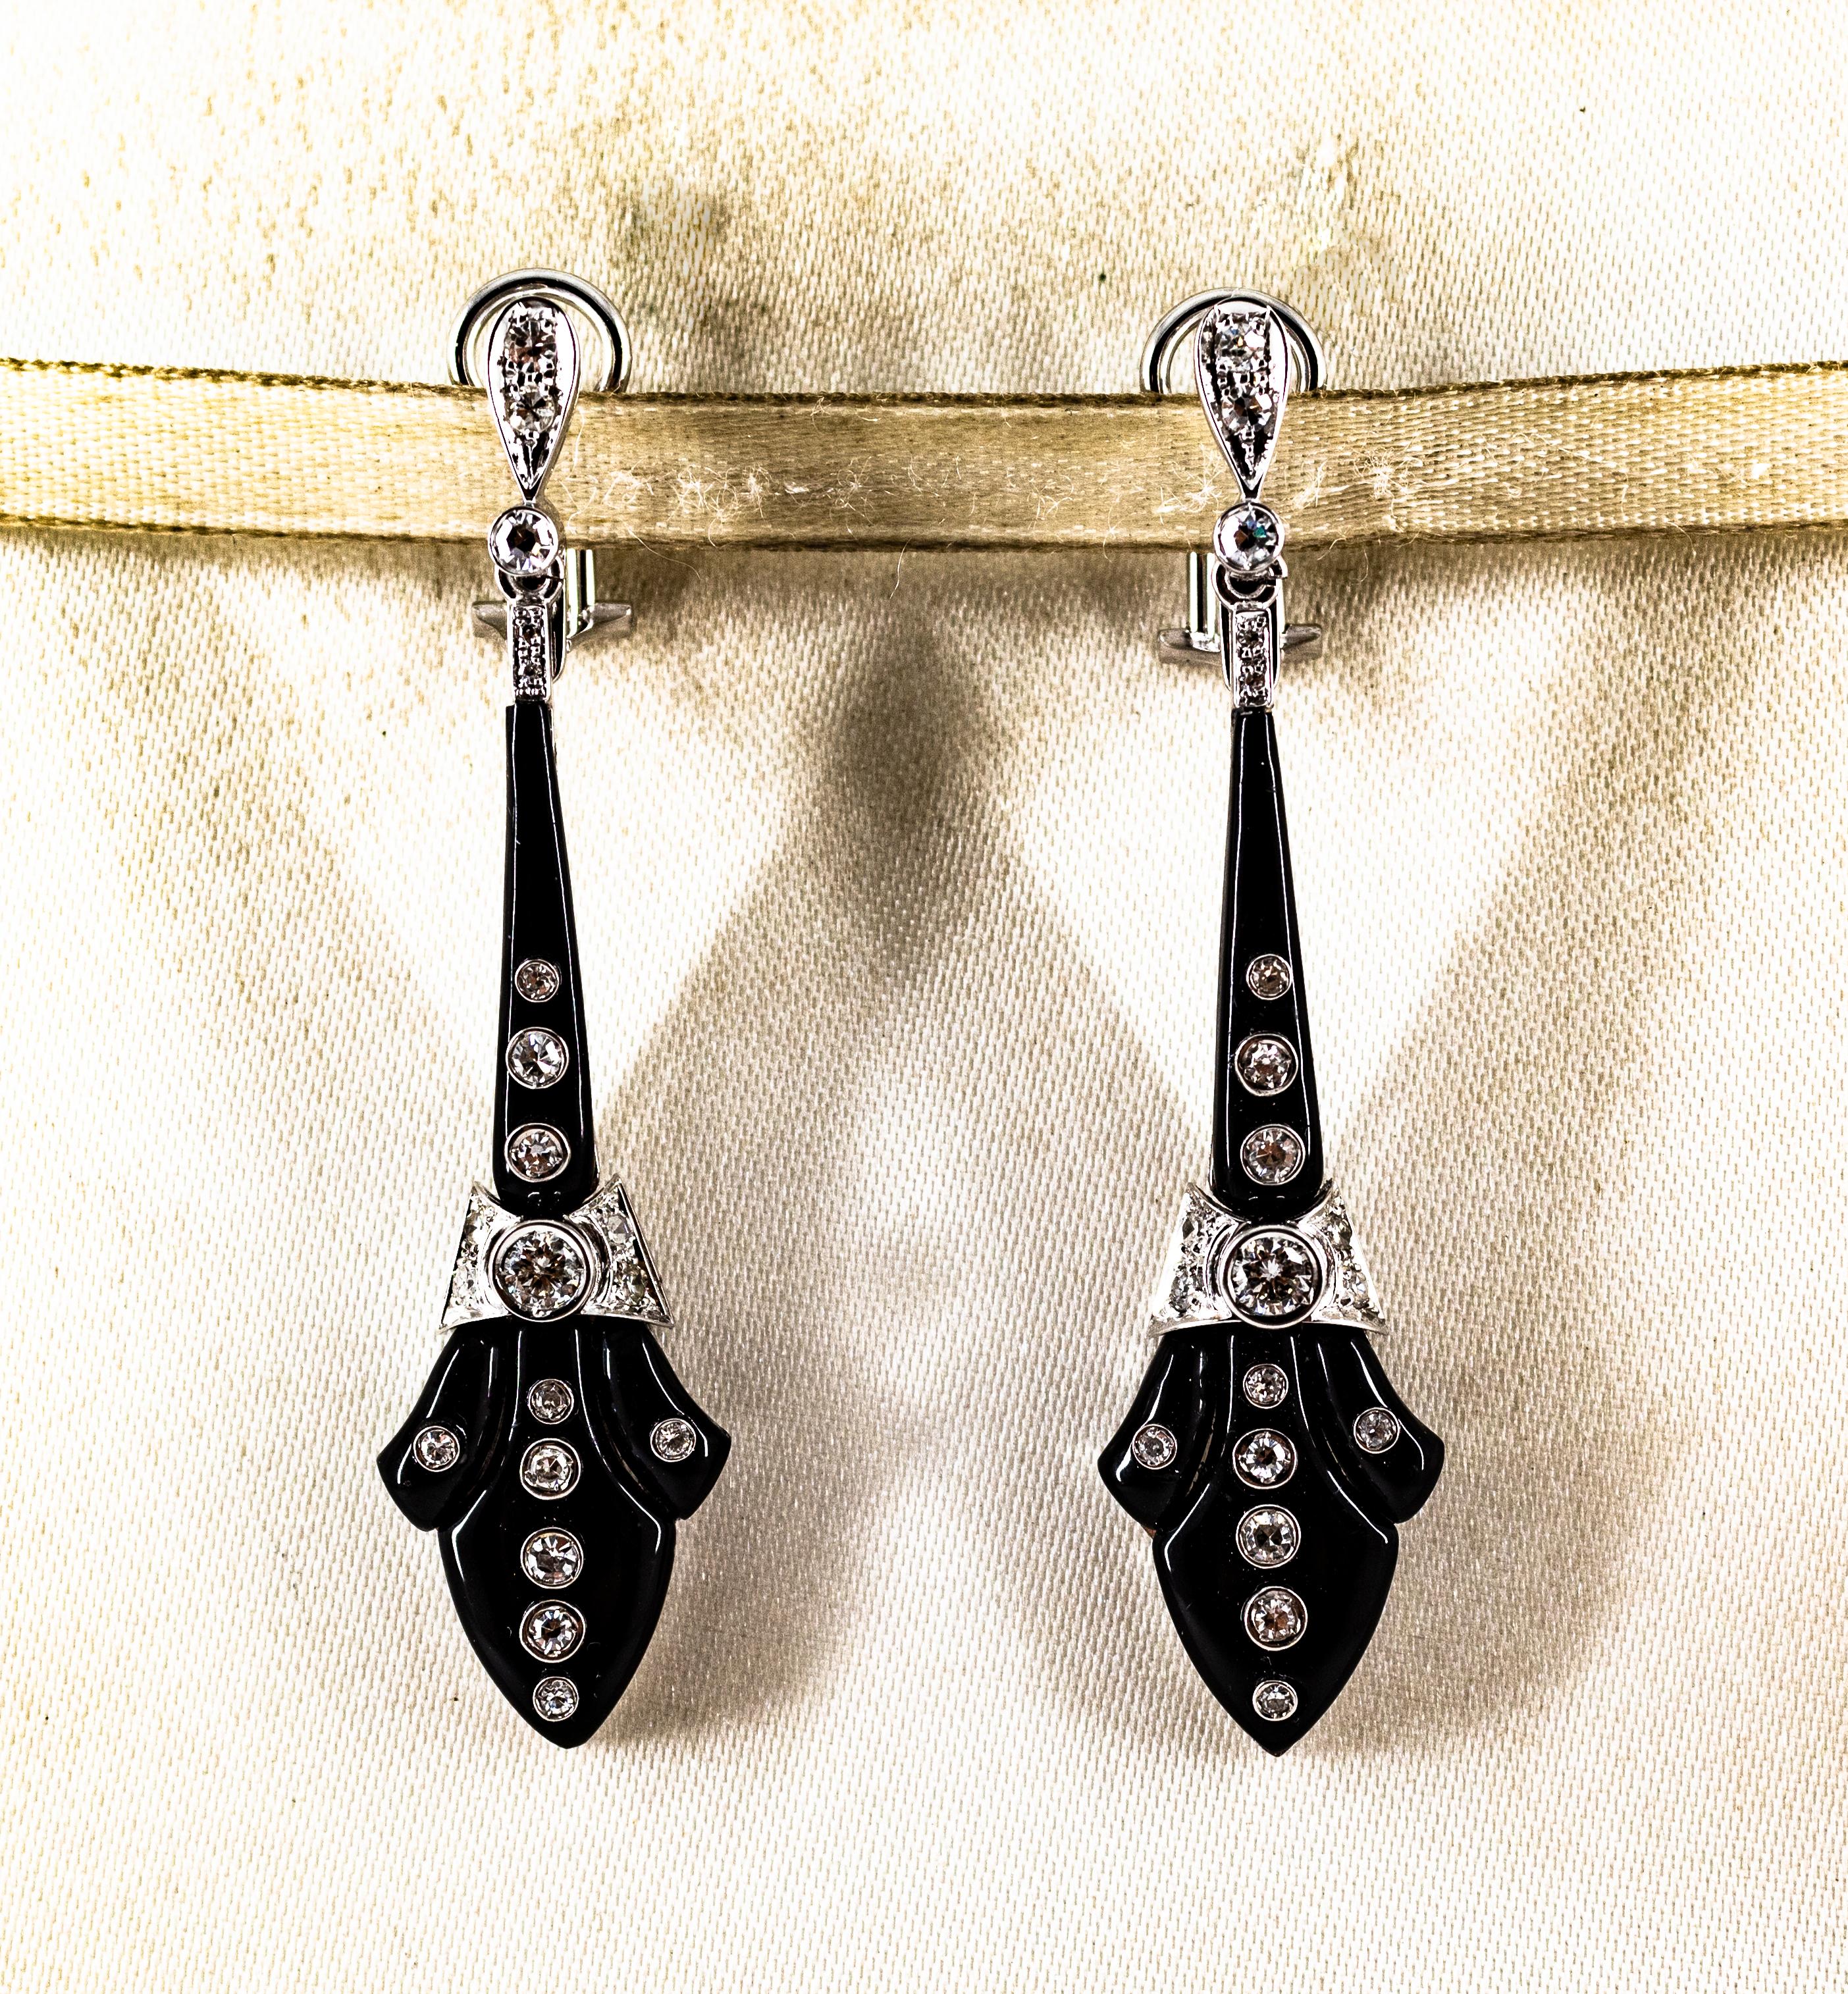 These Earrings are made of 14K White Gold.
These Earrings have 1.00 Carats of White Modern Round Cut Diamonds.
These Earrings have Onyx.
These Earrings are inspired by Art Deco.

All our Earrings have pins for pierced ears but we can change the